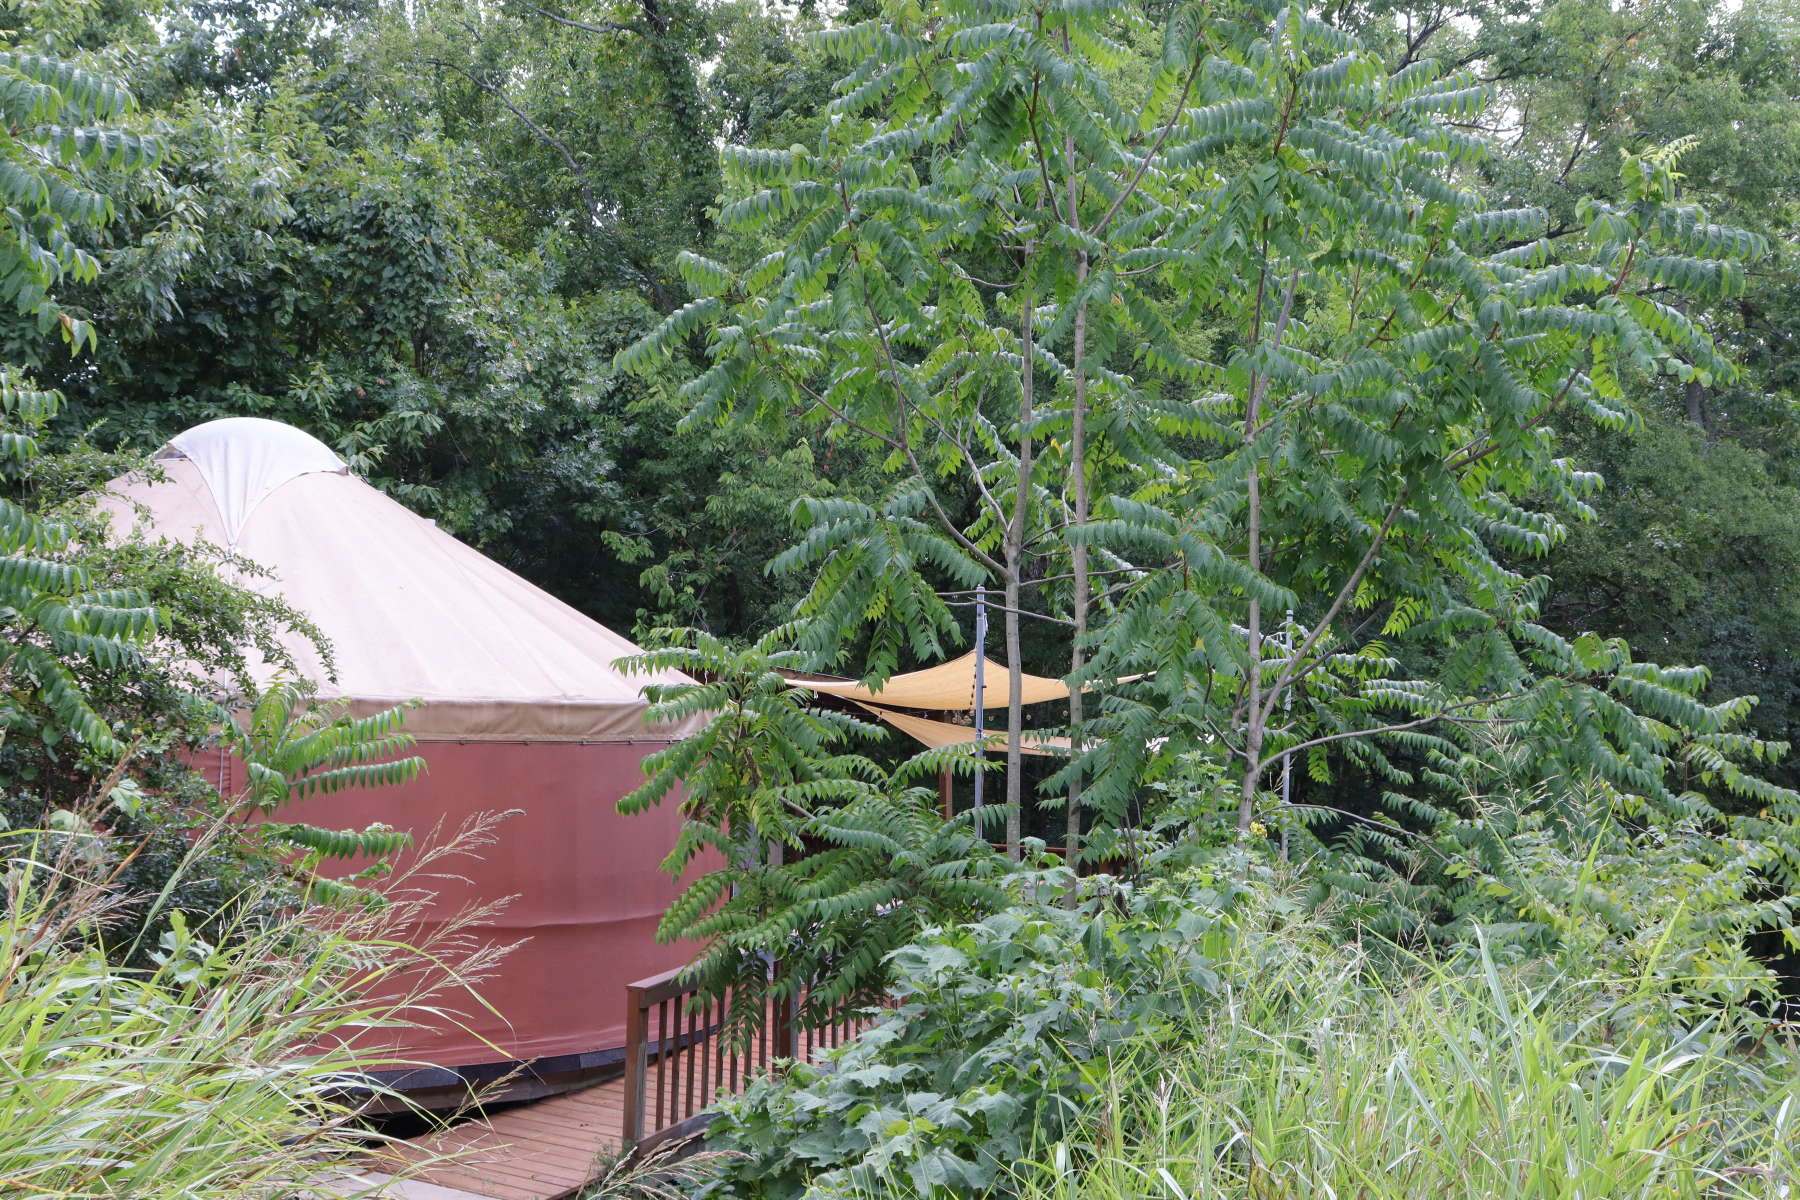 Tranquil Riverside Yurt Hipcamp In Nashville Tennessee 3080